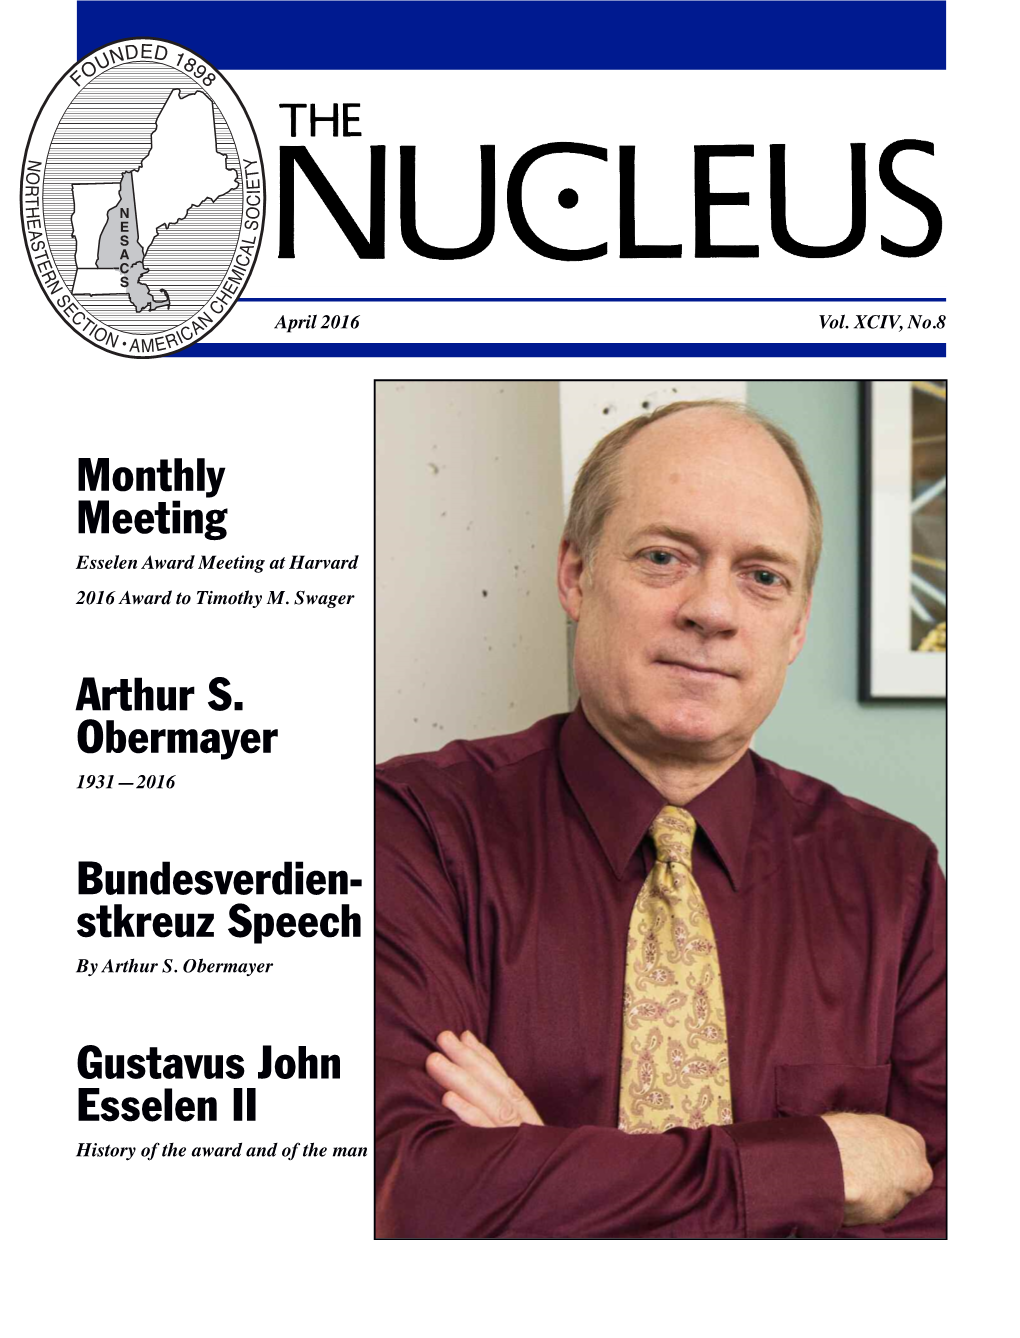 March 2015 NUCLEUS 2-16-15Aa5web